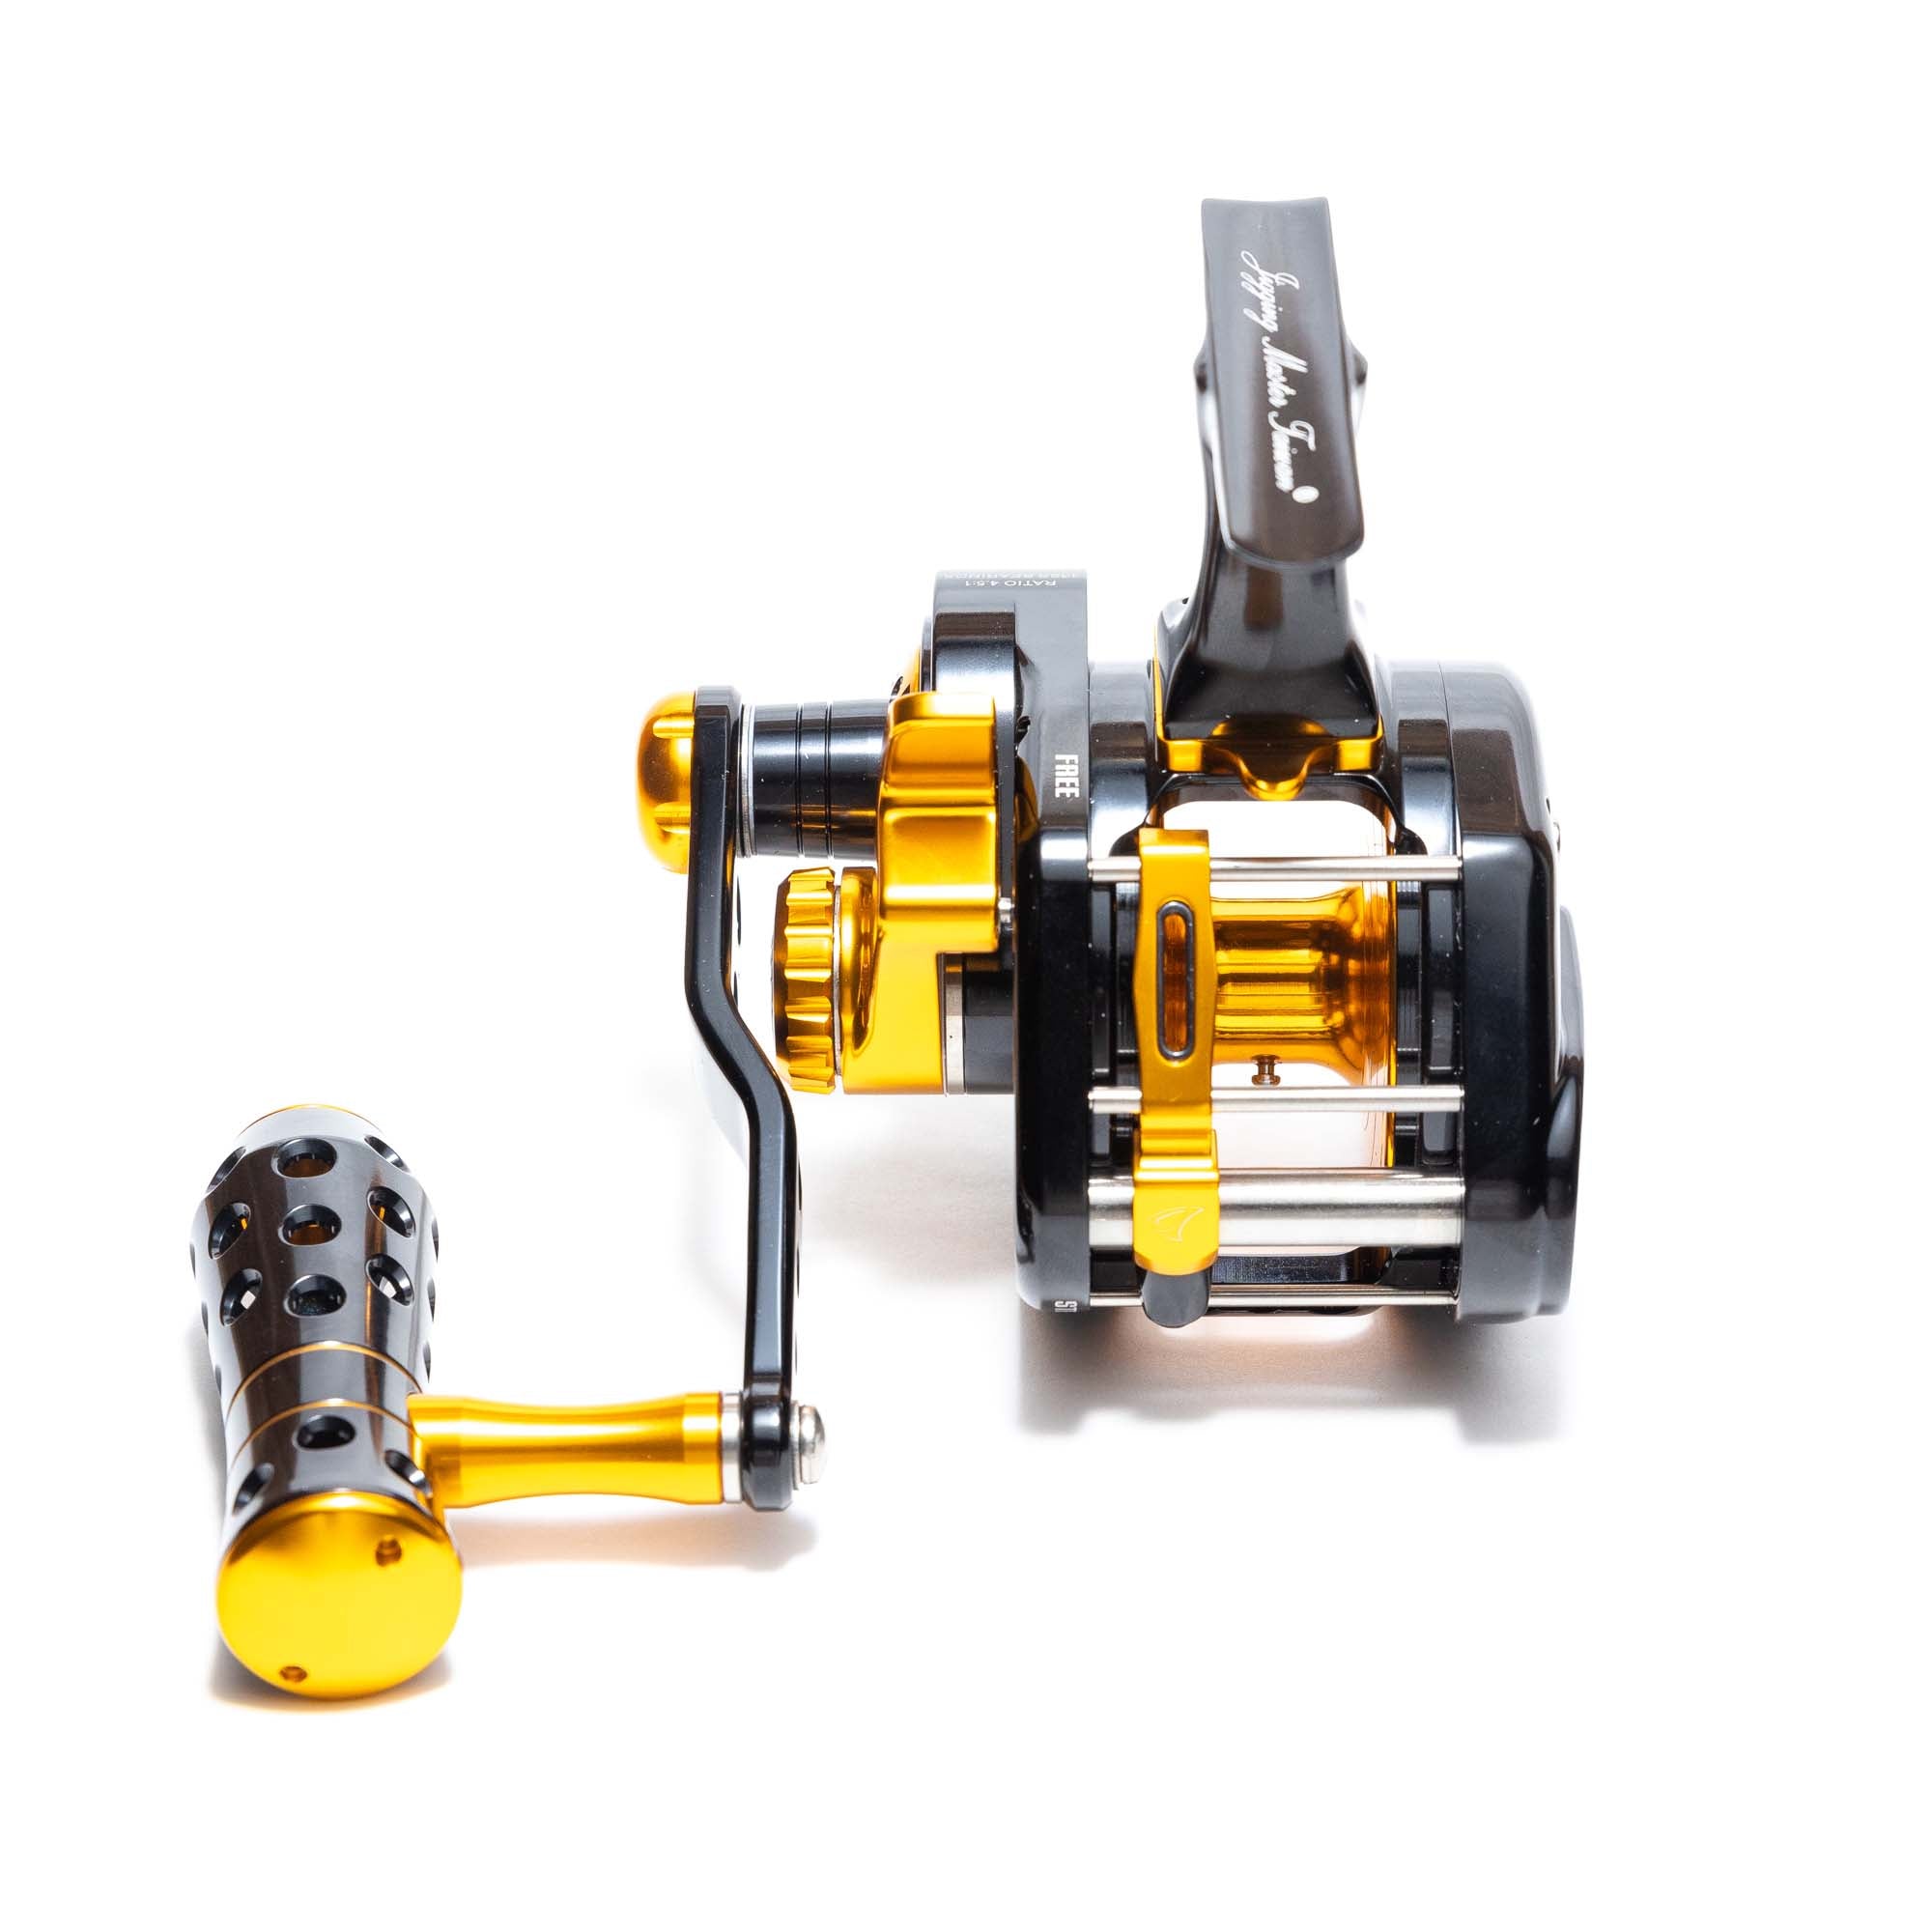 Jigging Master Underhead PE5N Right Handed - Compleat Angler